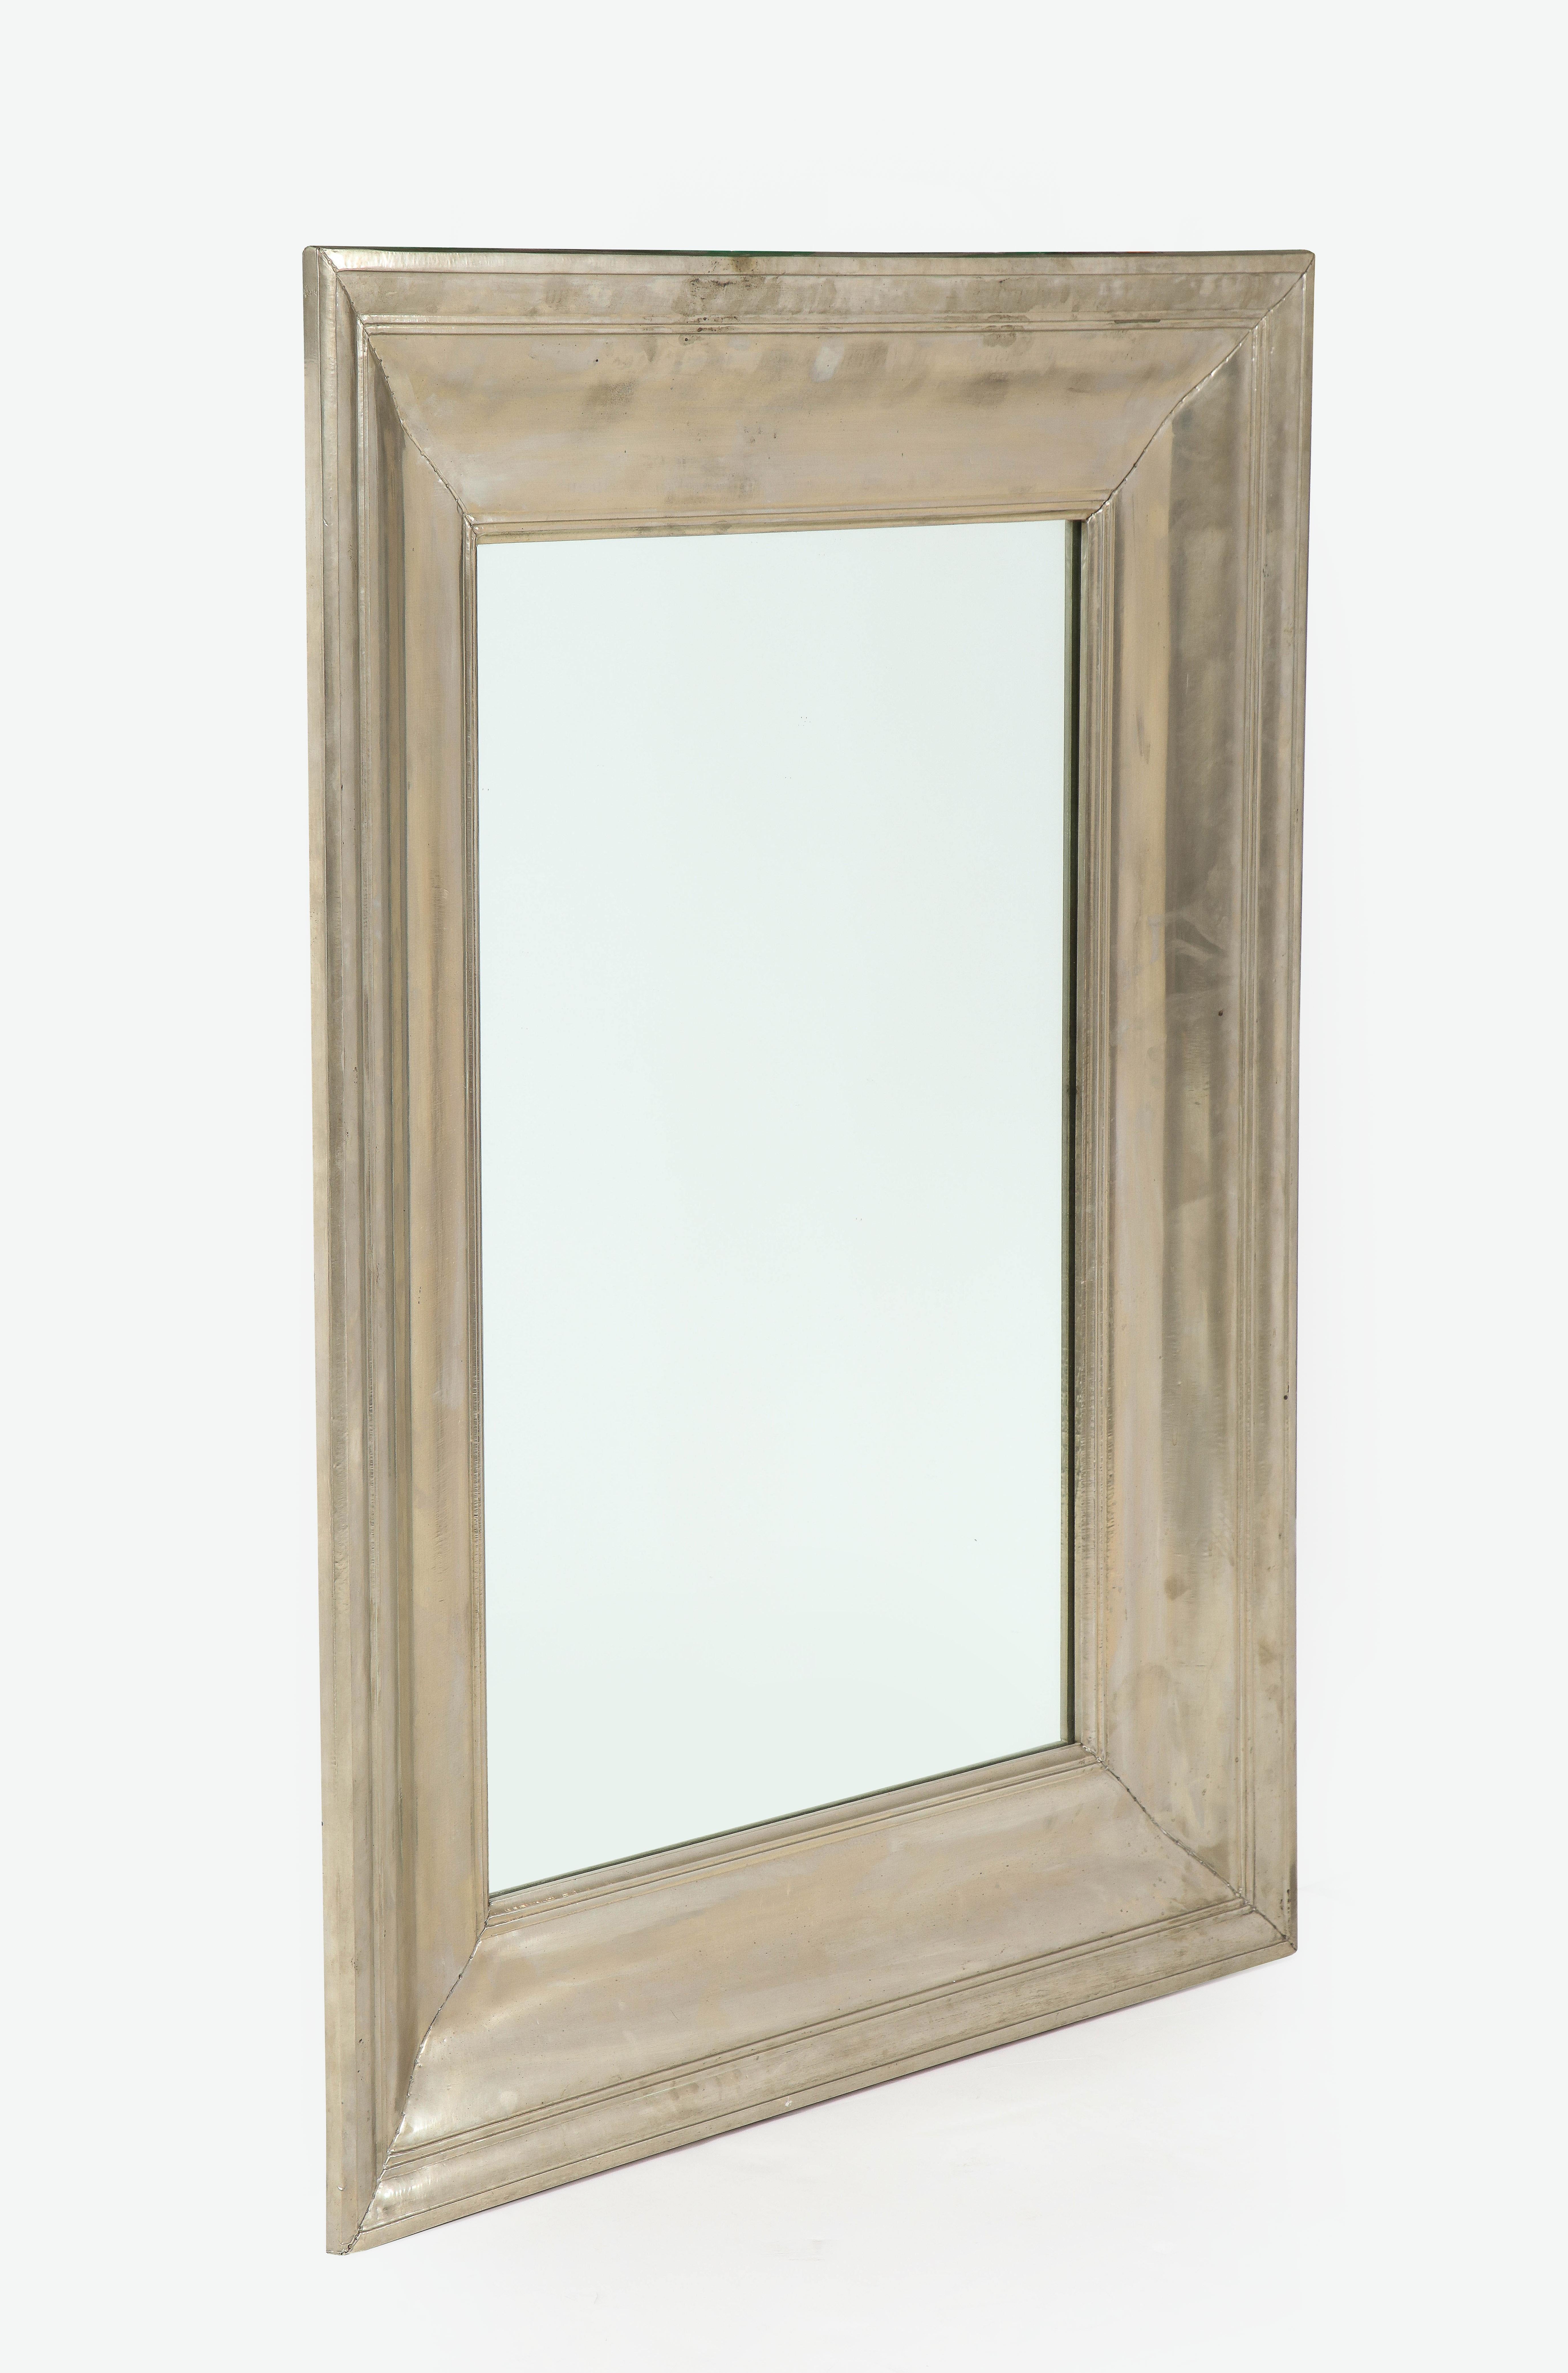 Wonderful large bold framed mirror.
The metal frame has a silvered finish and can be hung horizontally or vertically.